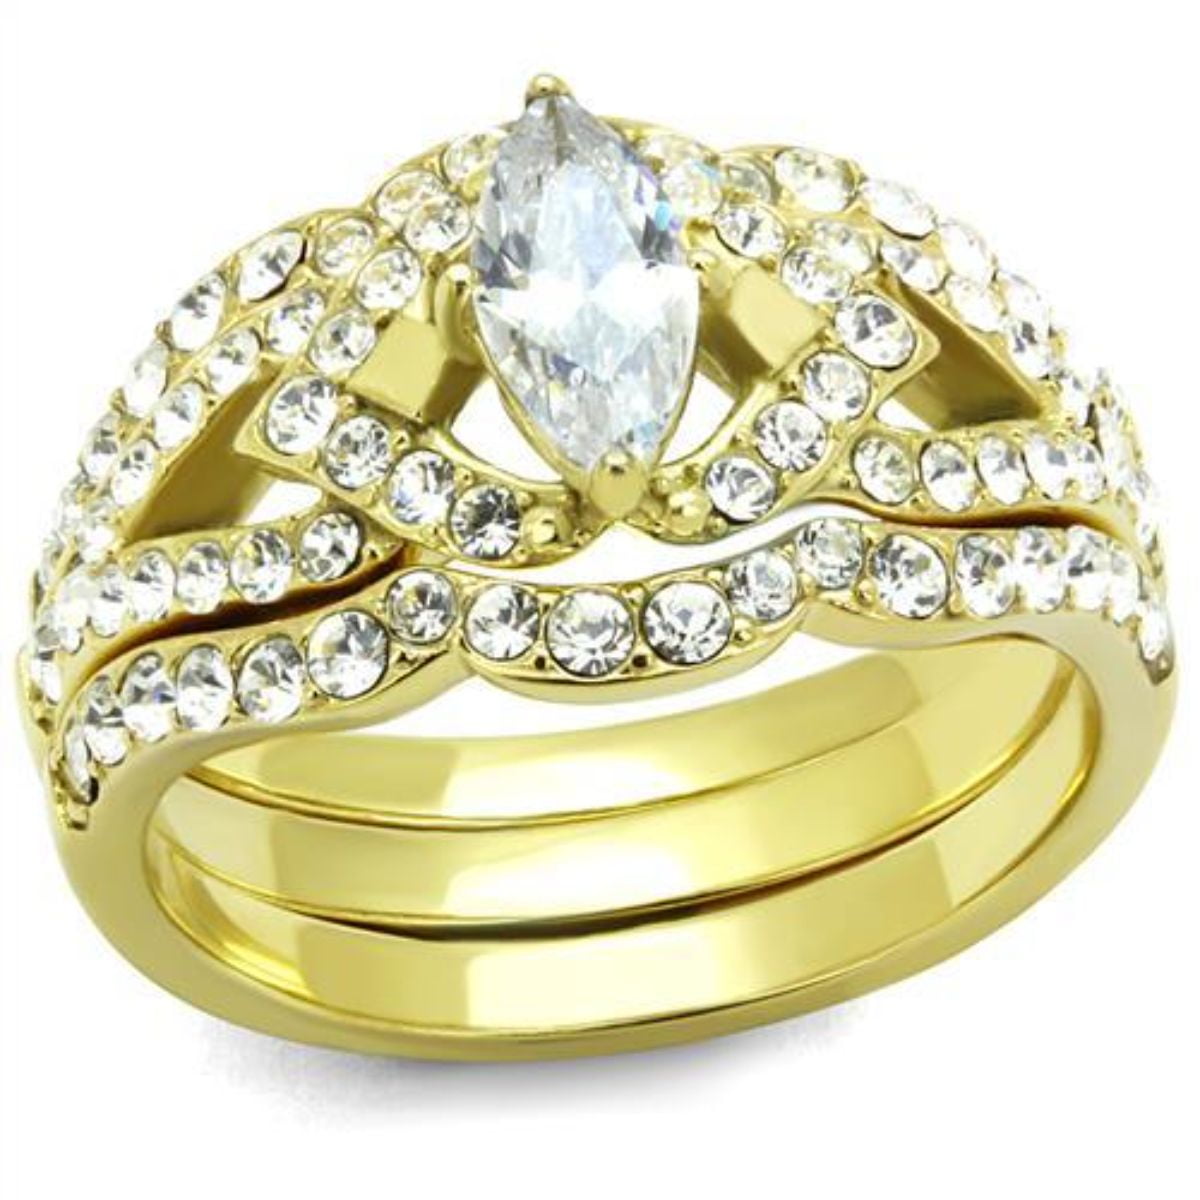 Gold Ion Plated Stainless Steel Antique style Brilliant Cut CZ Wedding Ring 